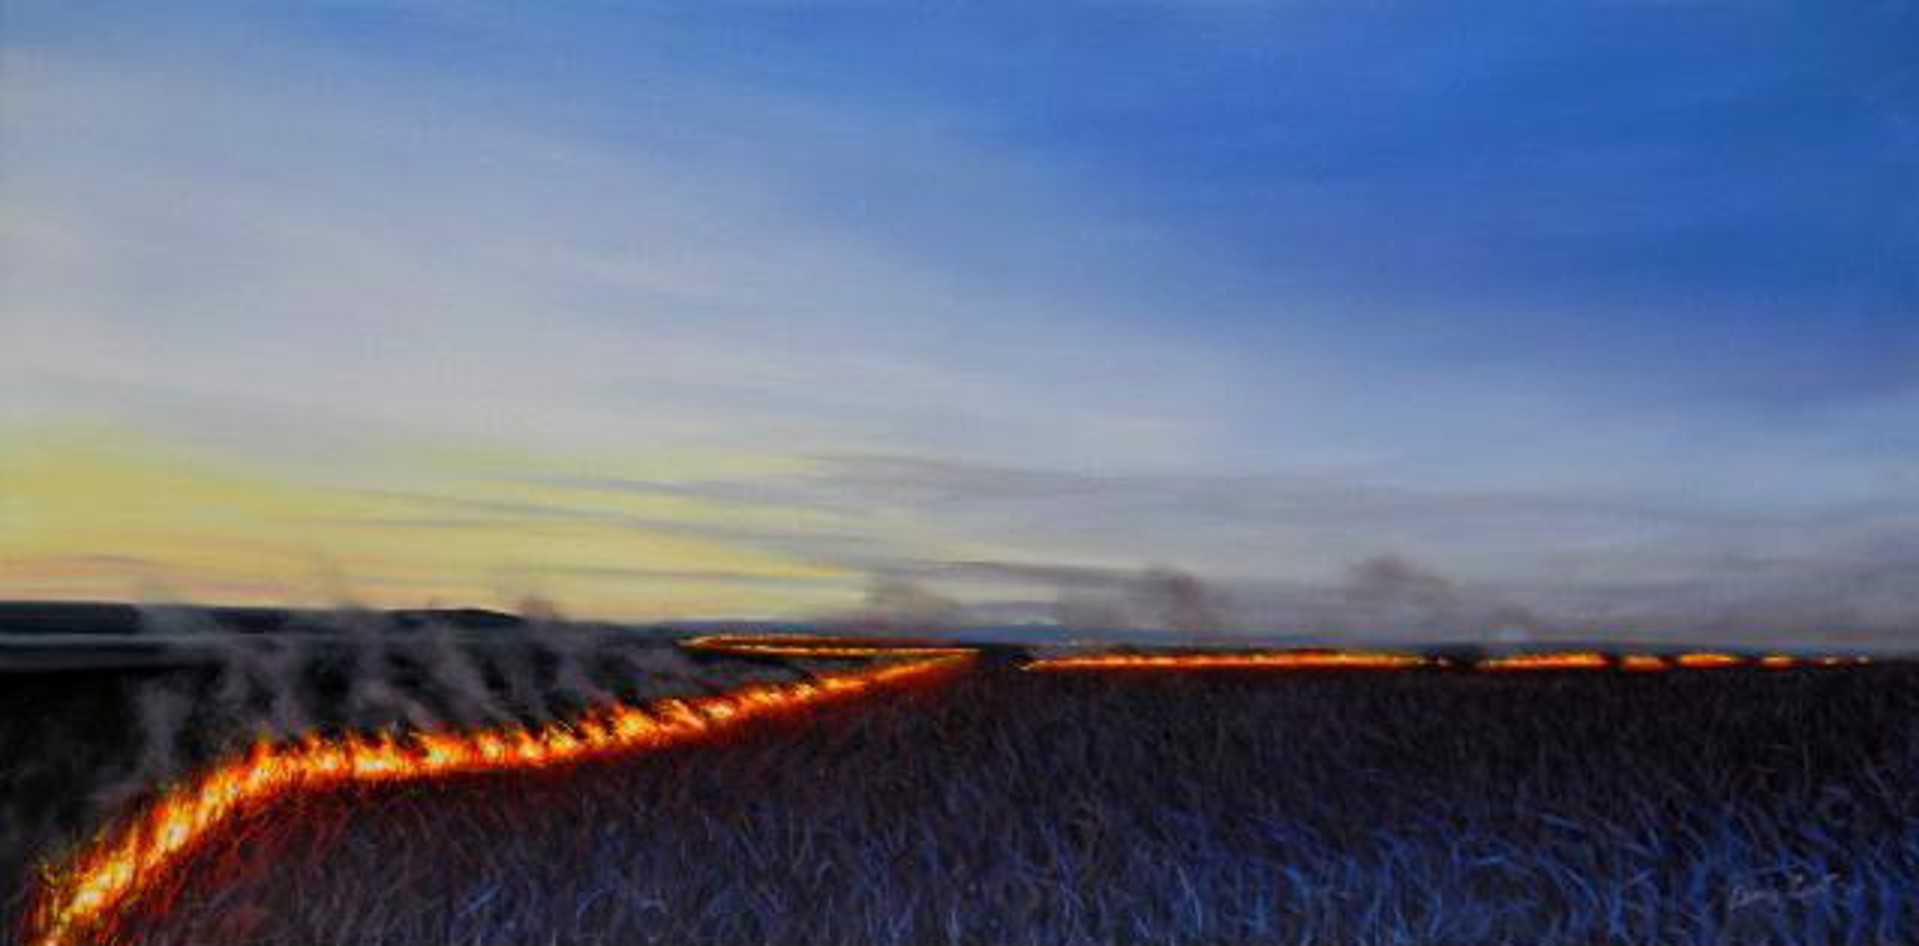 Line of Fire by Louis Copt